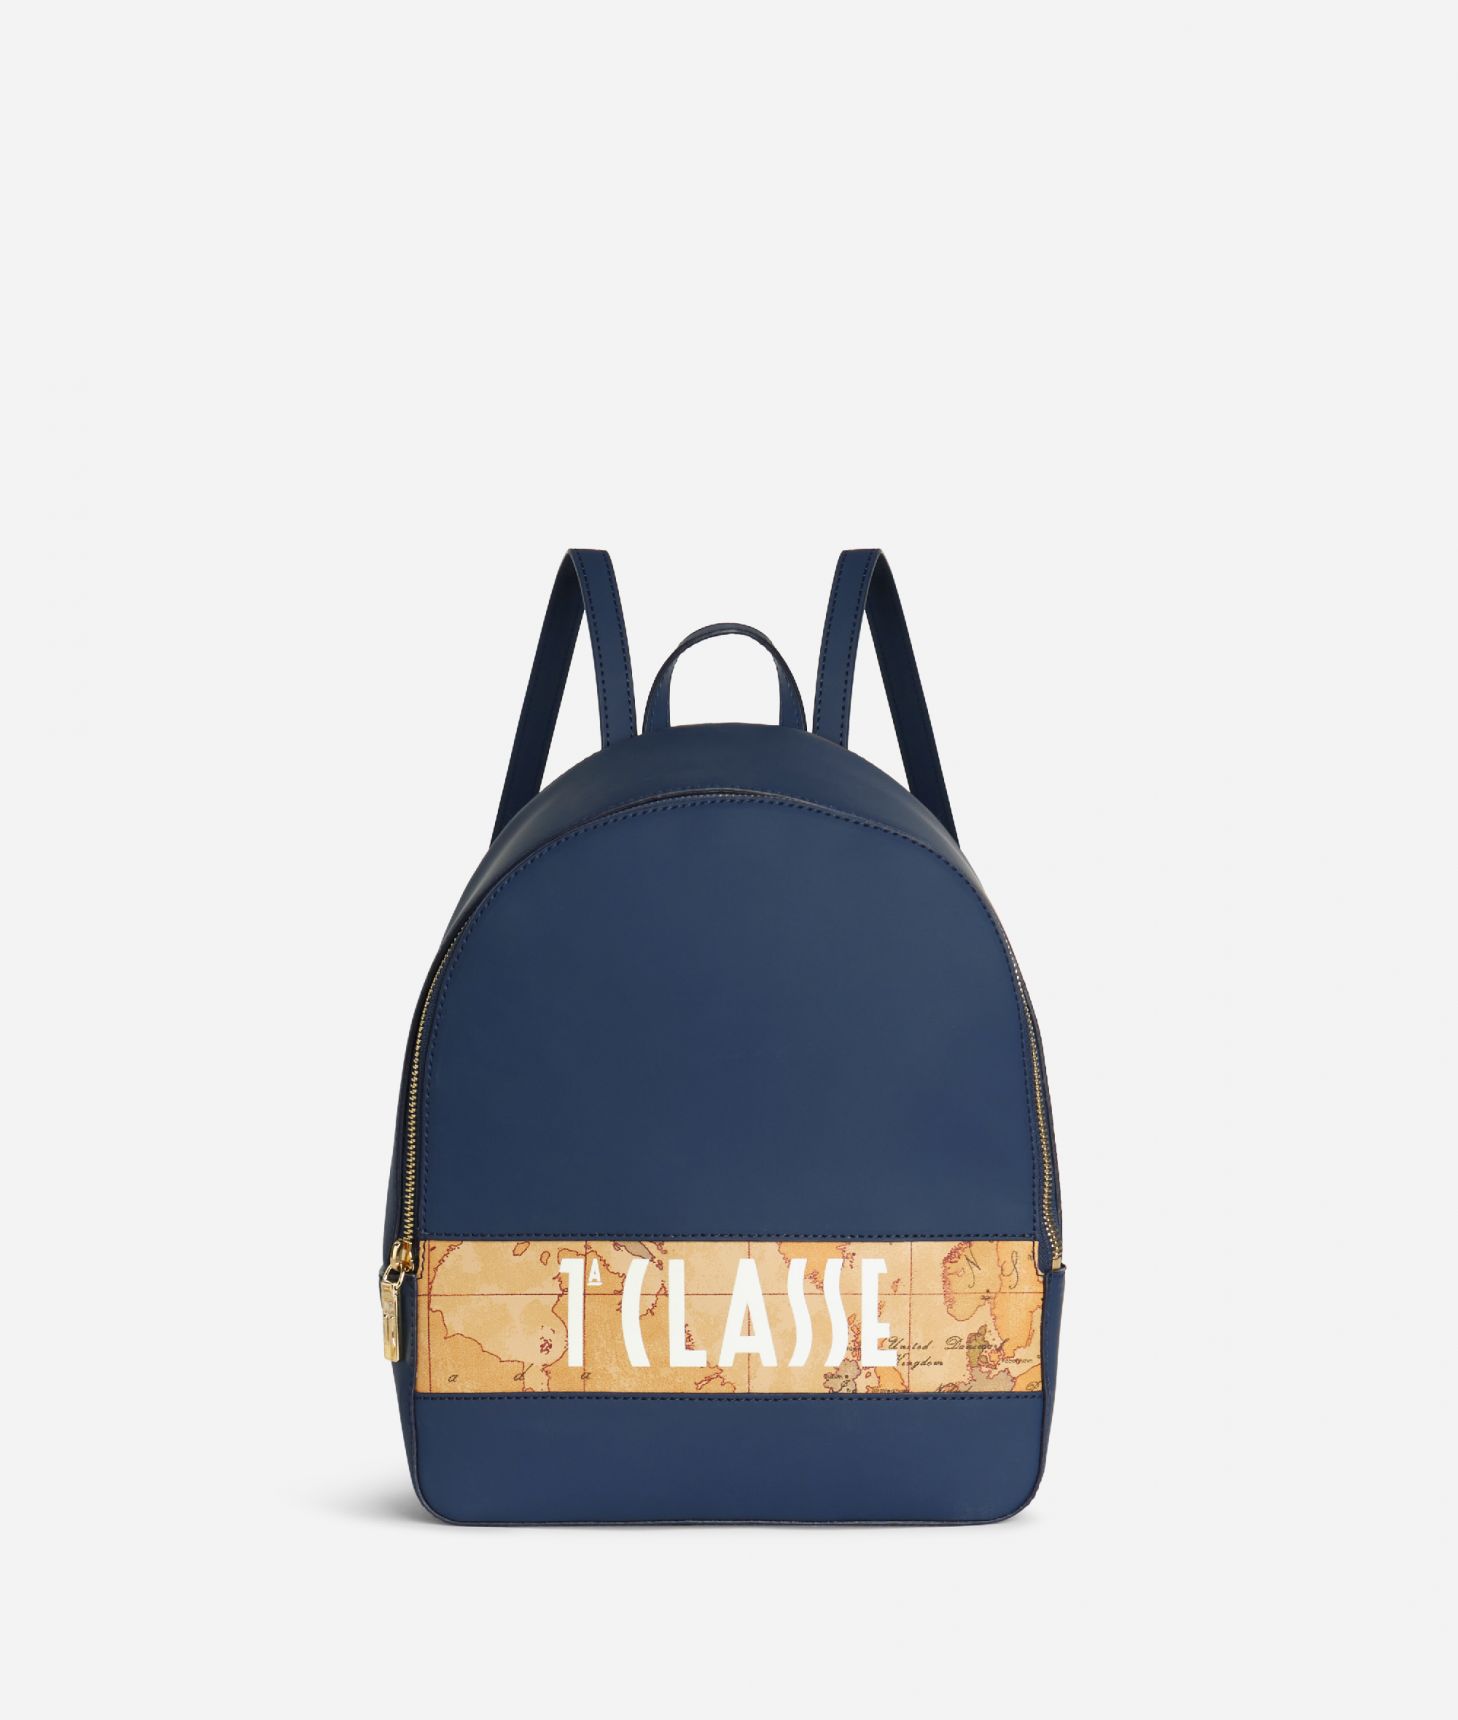 Geo Cruise Backpack with 1A Classe logo Navy Blue,front